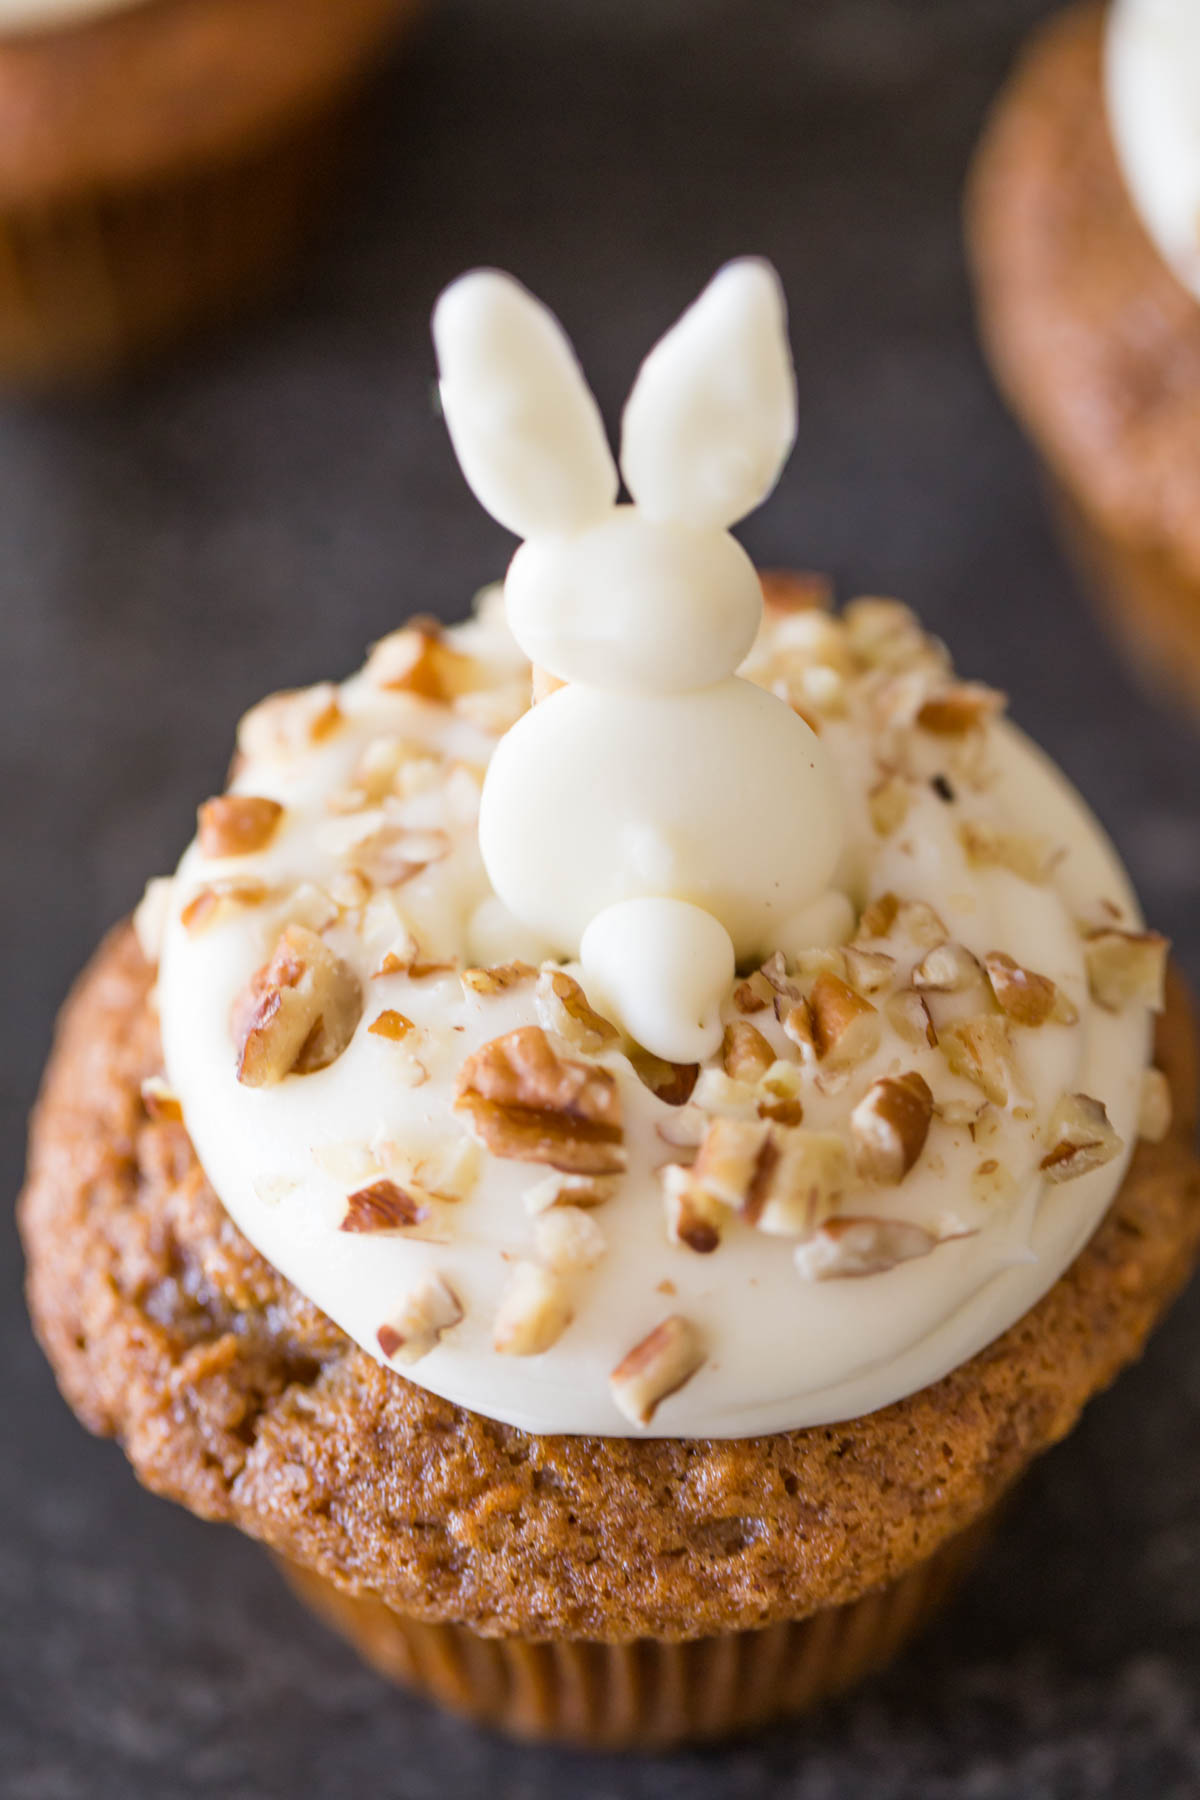 A Carrot Cake Cupcake with a white chocolate bunny on top.  